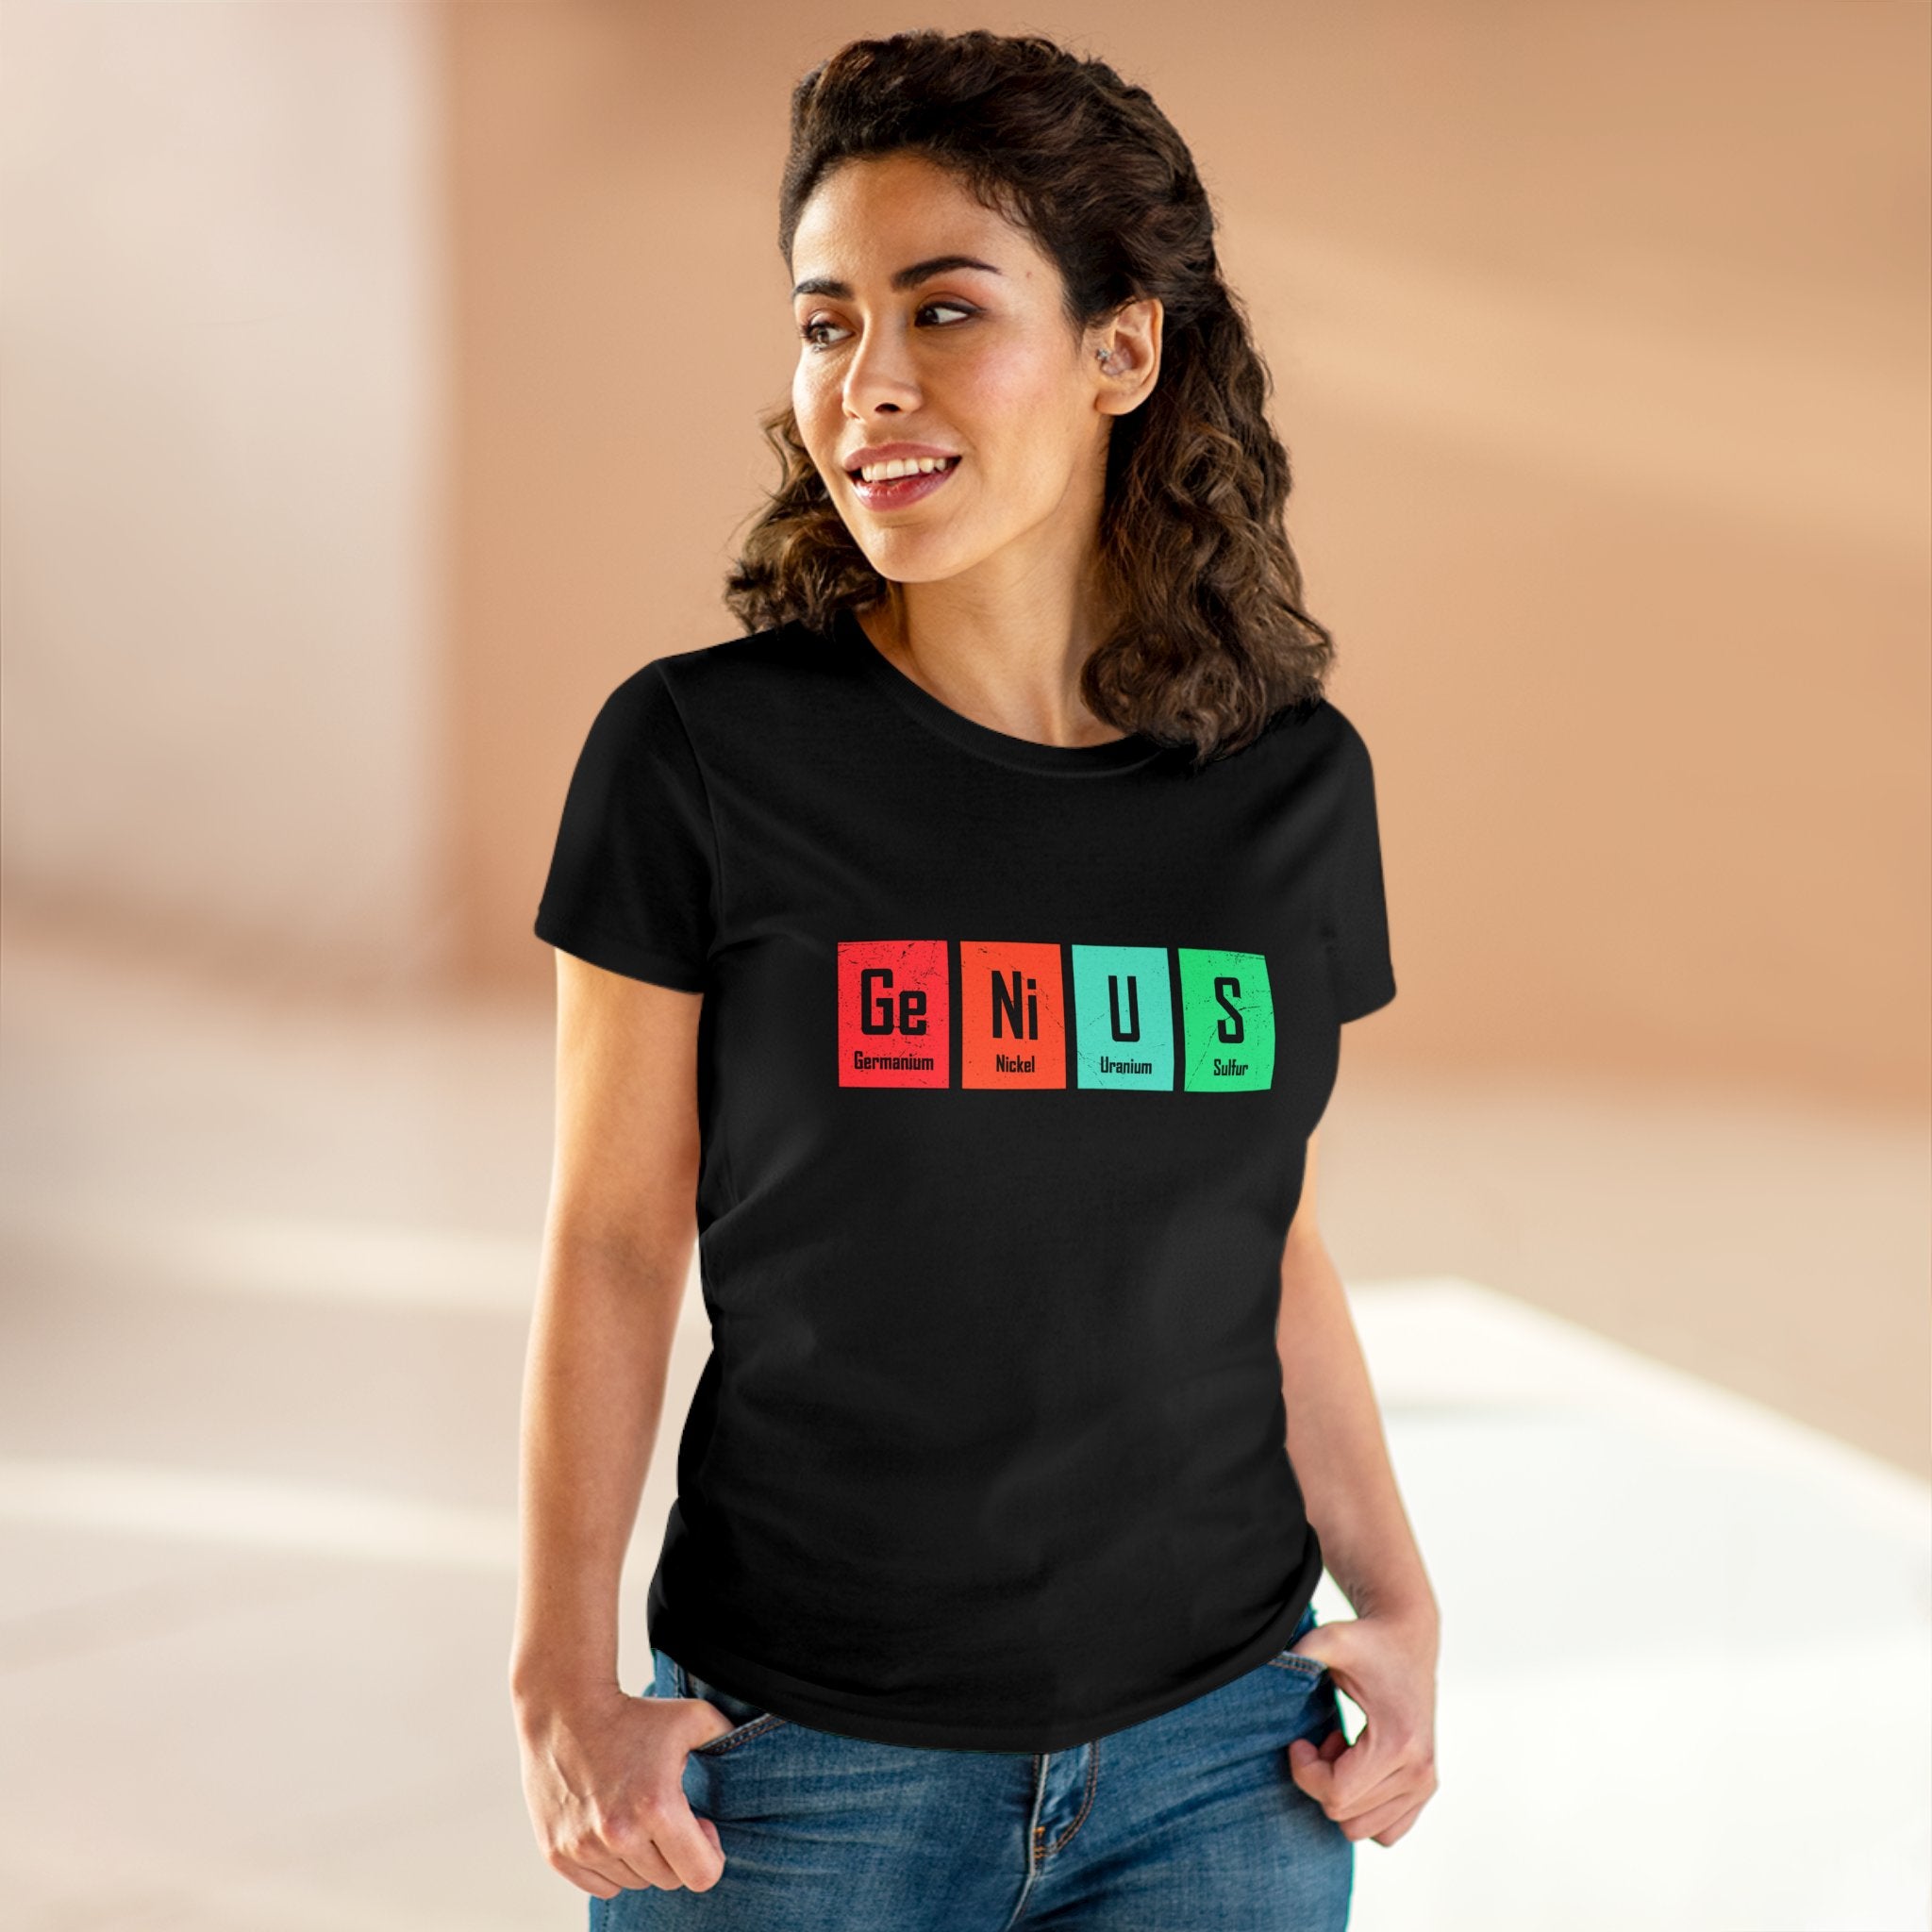 A woman wearing a cozy and stylish black Ge-Ni-U-S - Women's Tee with the design spelled out using periodic table elements stands indoors, casually smiling with her hands in pockets.